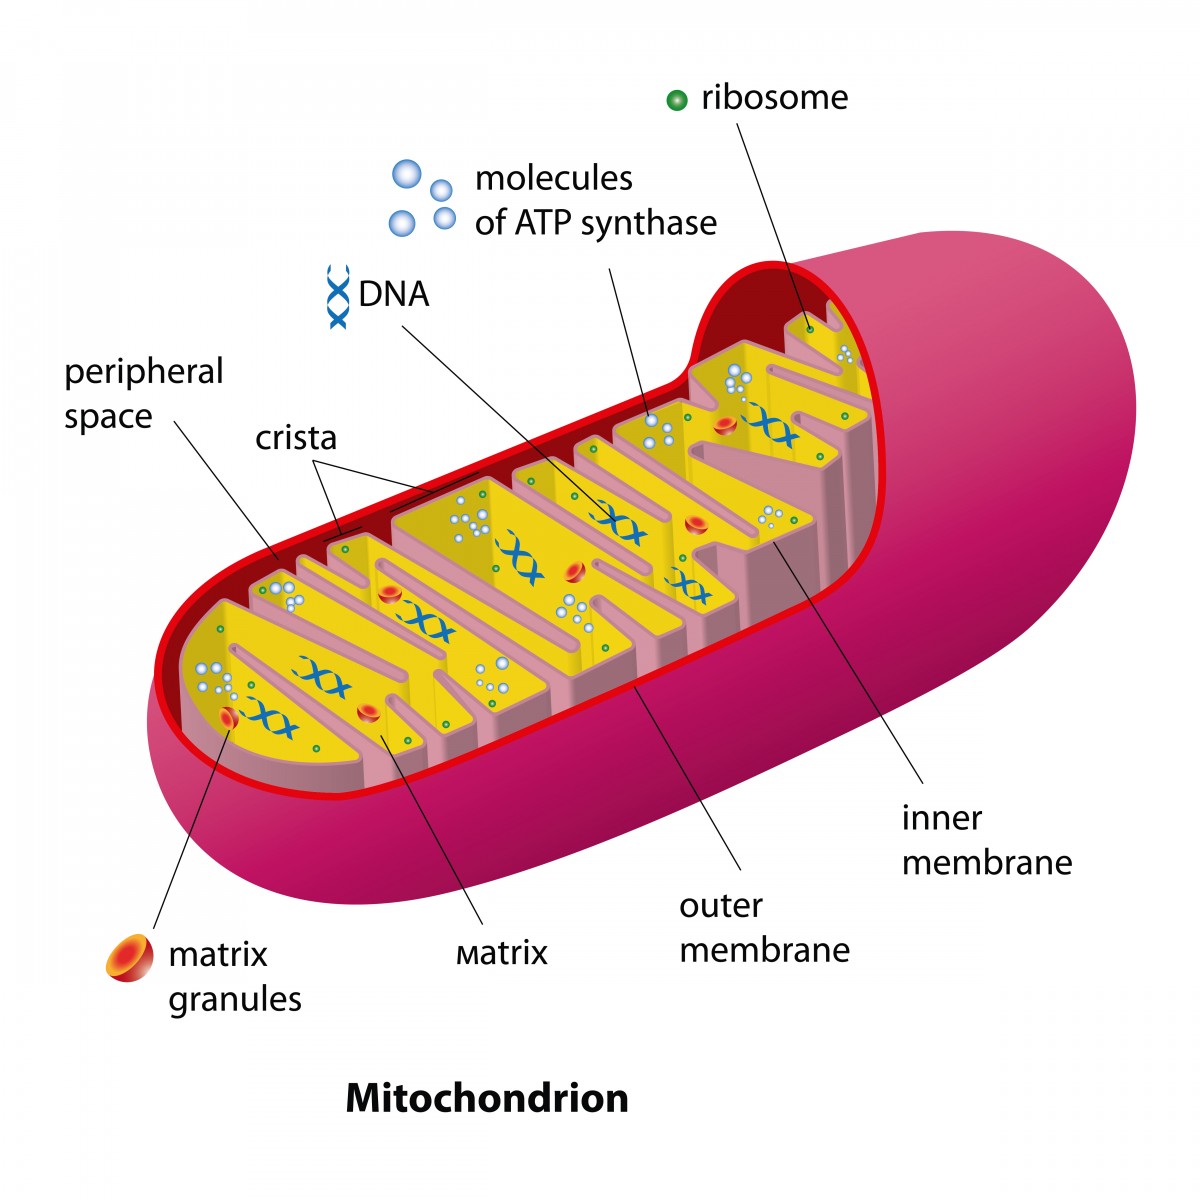 Researchers Reduce Mutated Mitochondrial Genomes Implicated in Mitochondrial Diseases